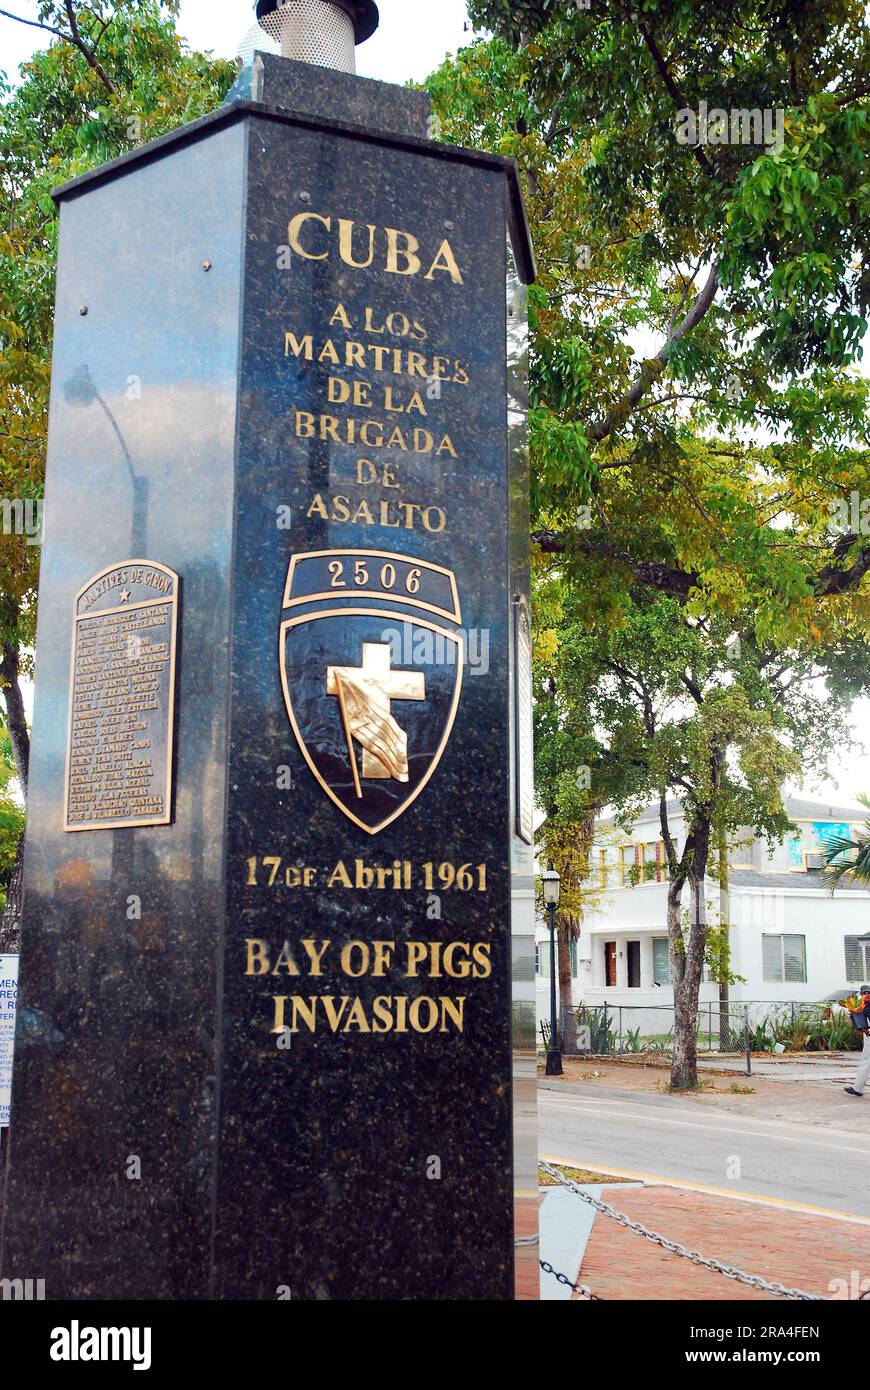 A monument in the Calle Ocho neighborhood of Miami honors those killed in the Bay of Pigs Invasion of Cuba in 1961 Stock Photo